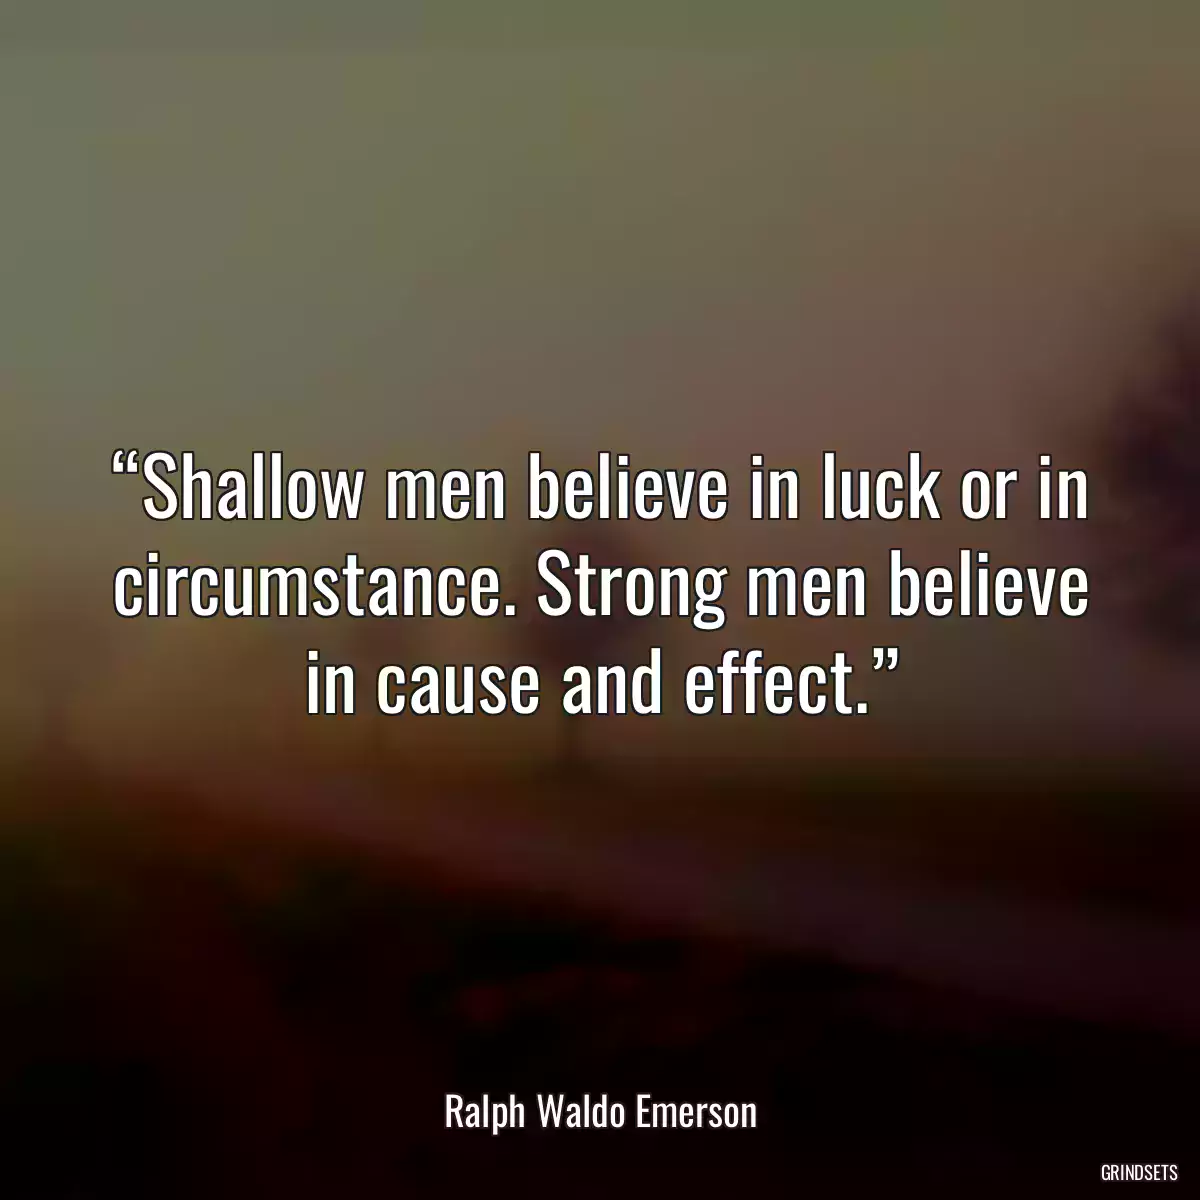 “Shallow men believe in luck or in circumstance. Strong men believe in cause and effect.”